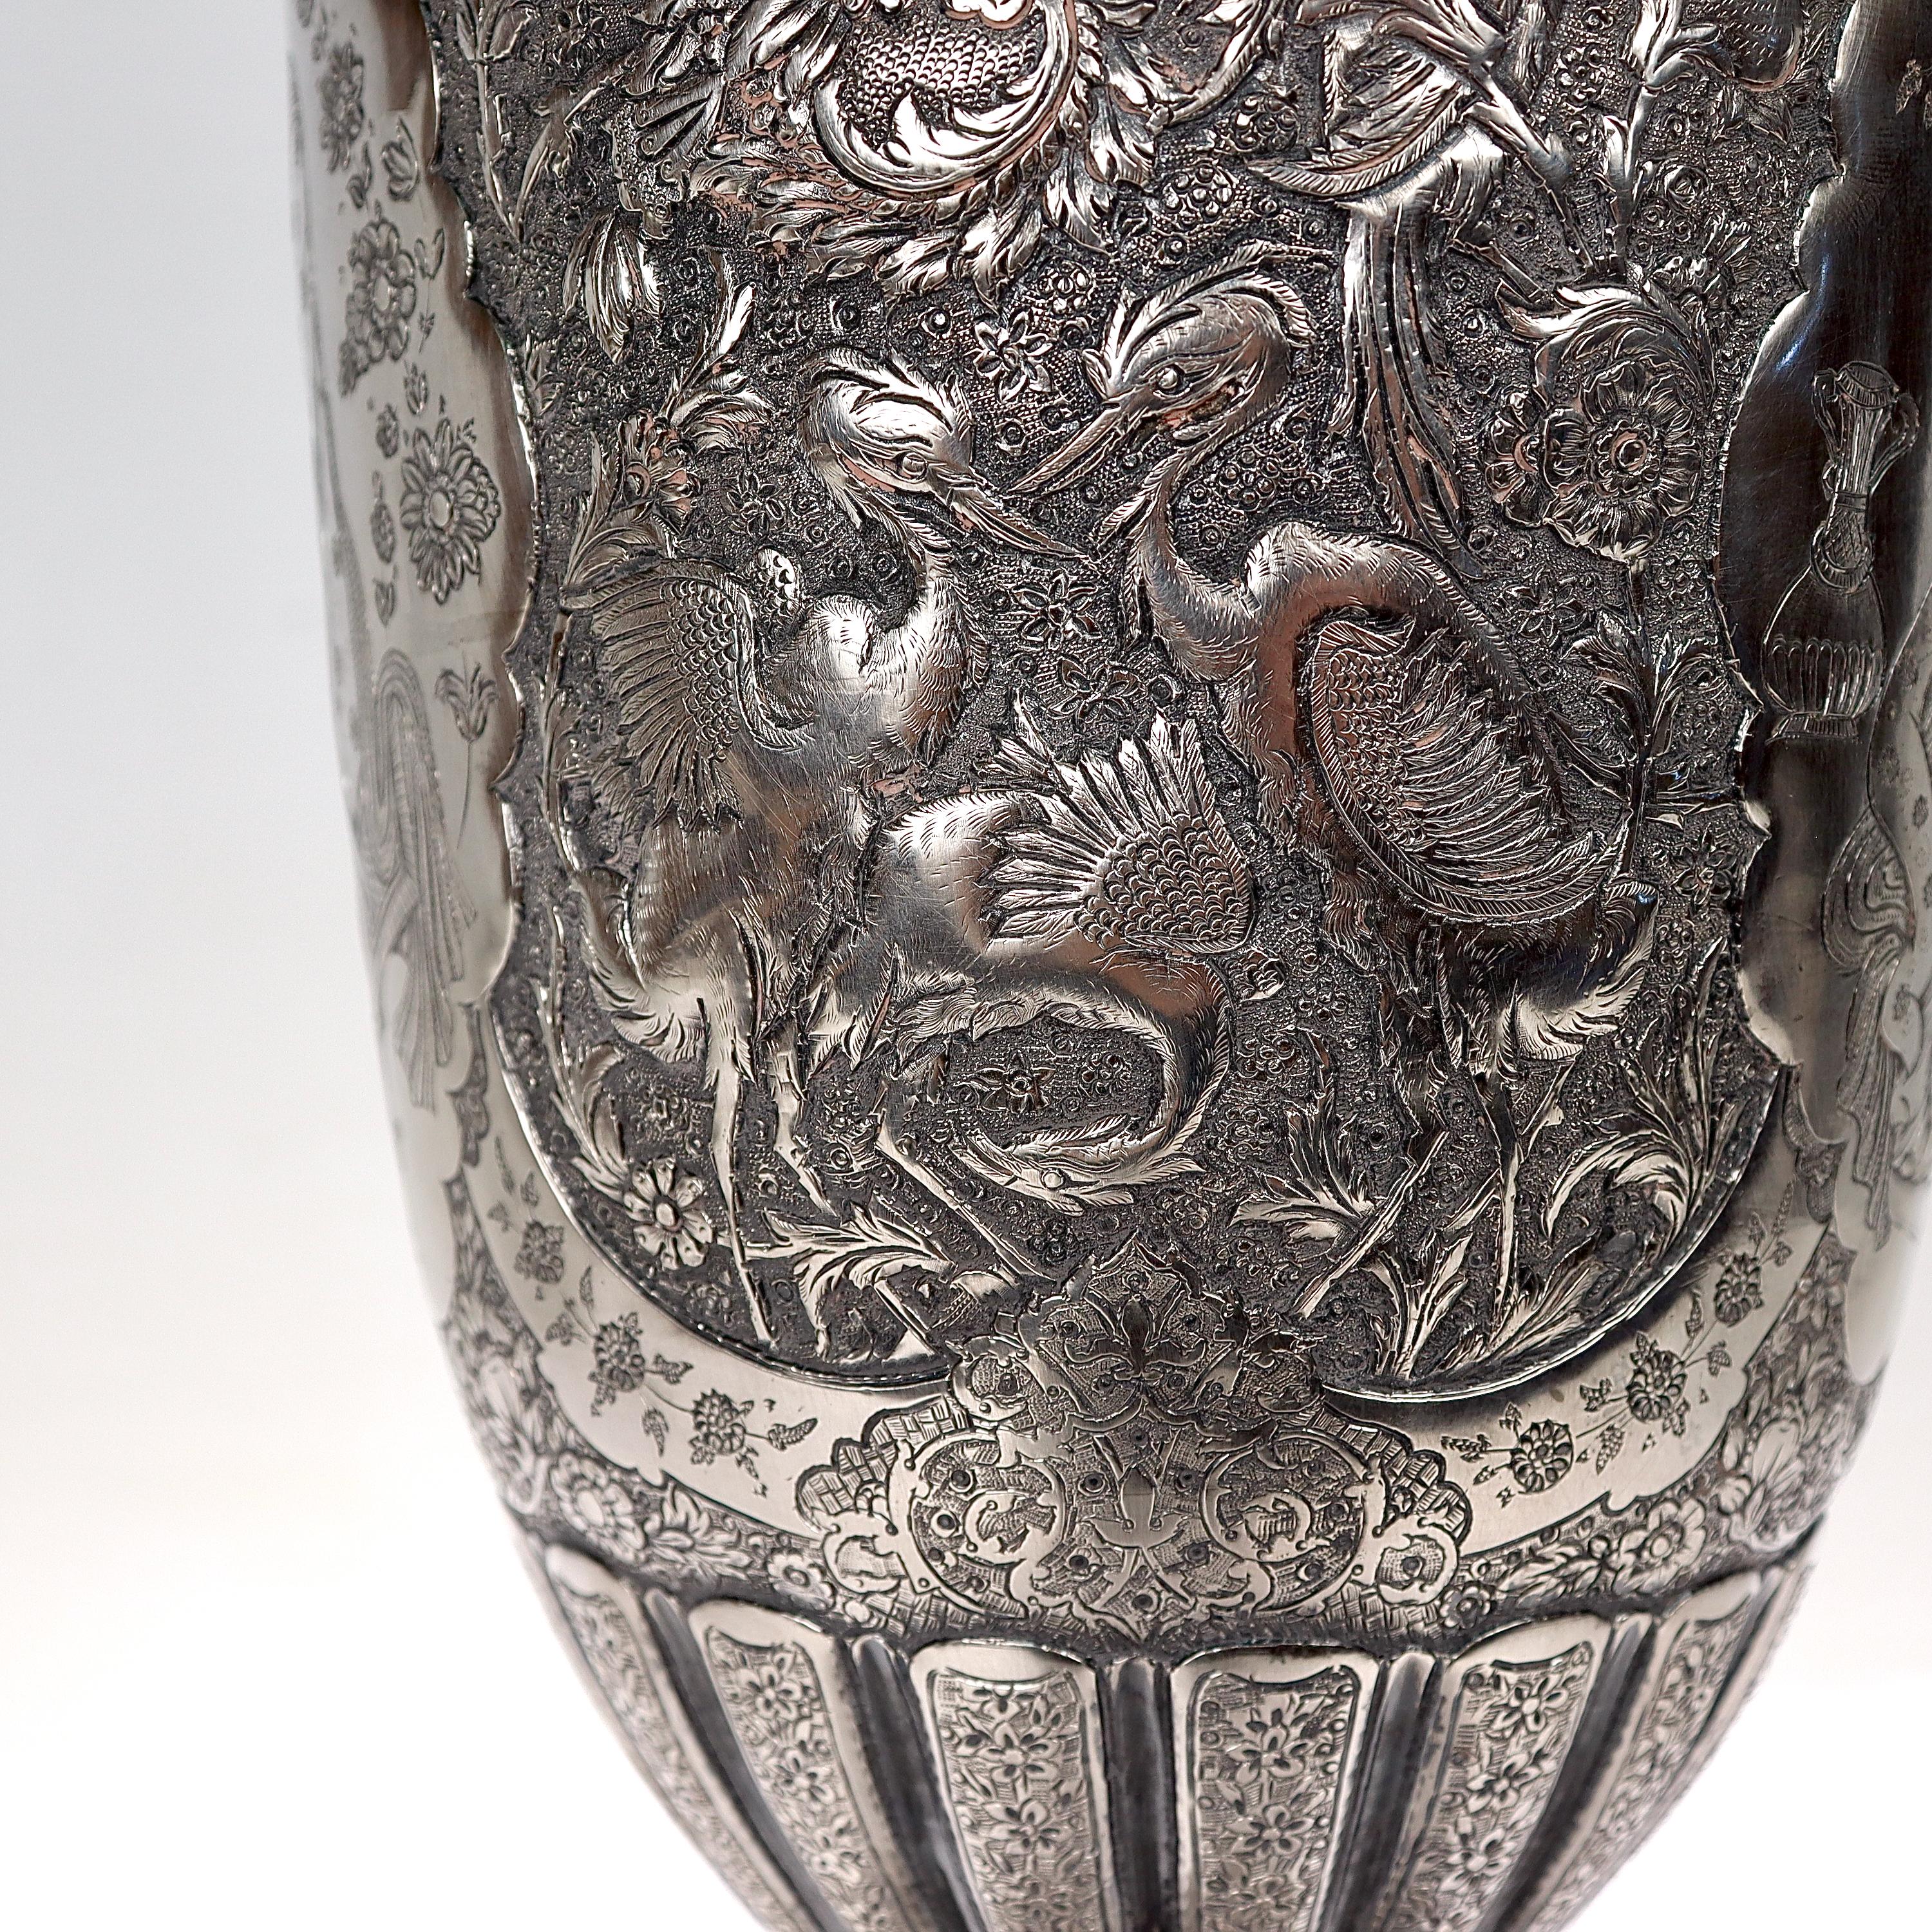 British Colonial Large Twin-Handled Old or Antique Islamic Ottoman / Persian Repoussé Silver Vase For Sale